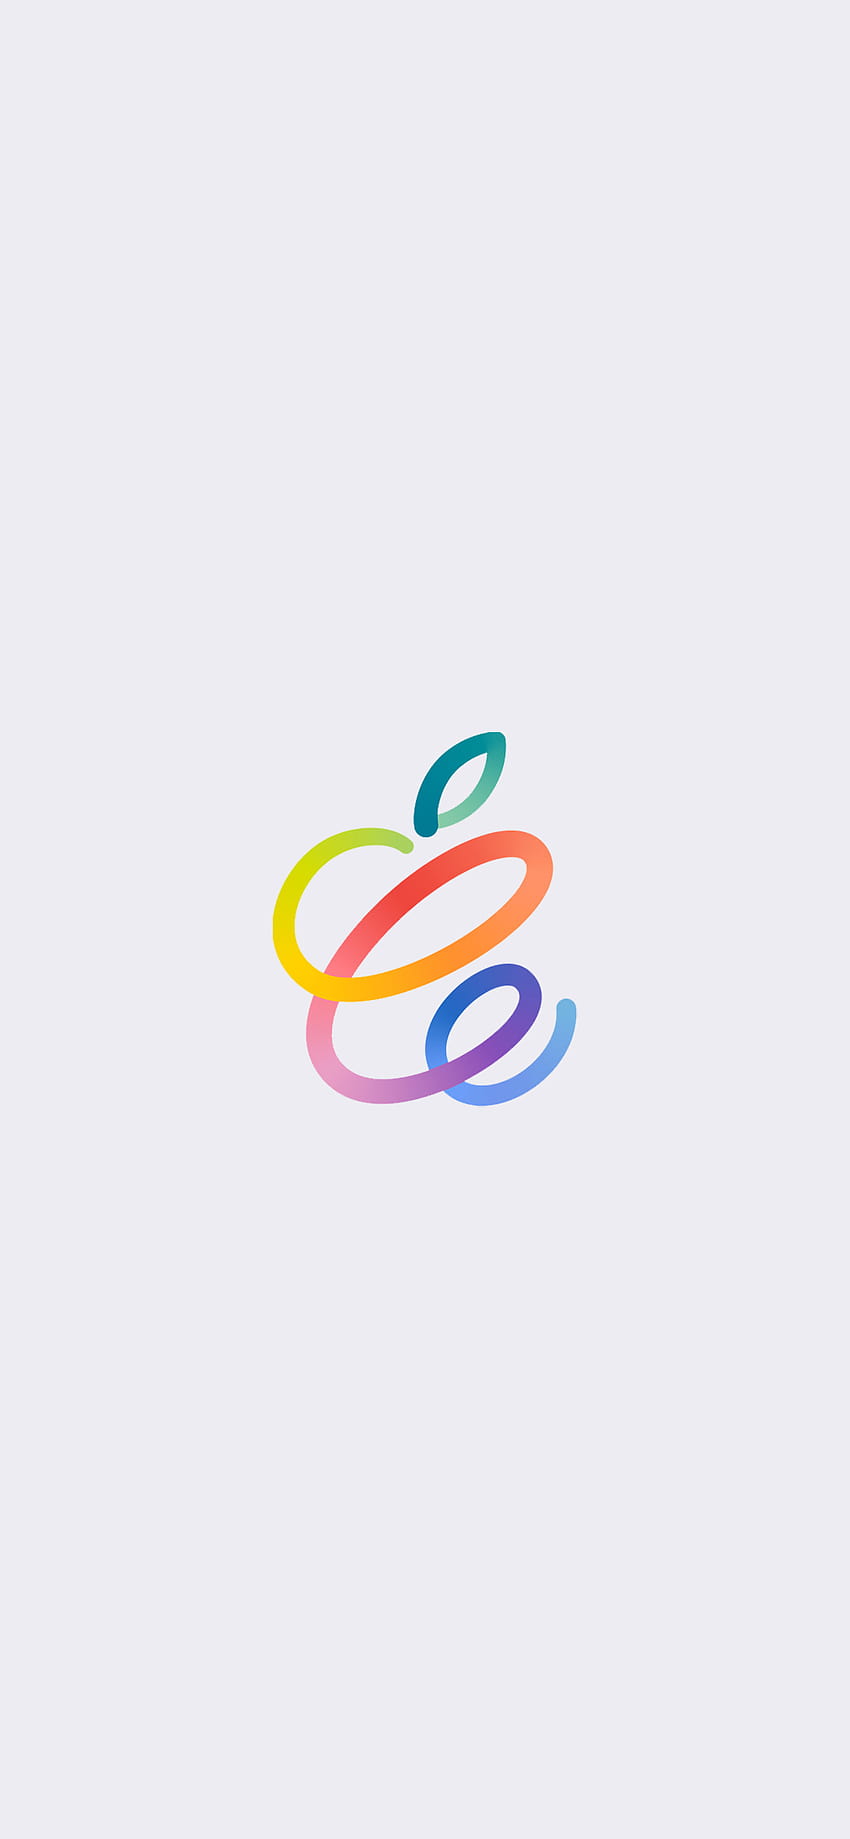 Apple Spring Loaded event for iPhone, iPad, and Mac, apple logo iphone 12 pro max HD phone wallpaper